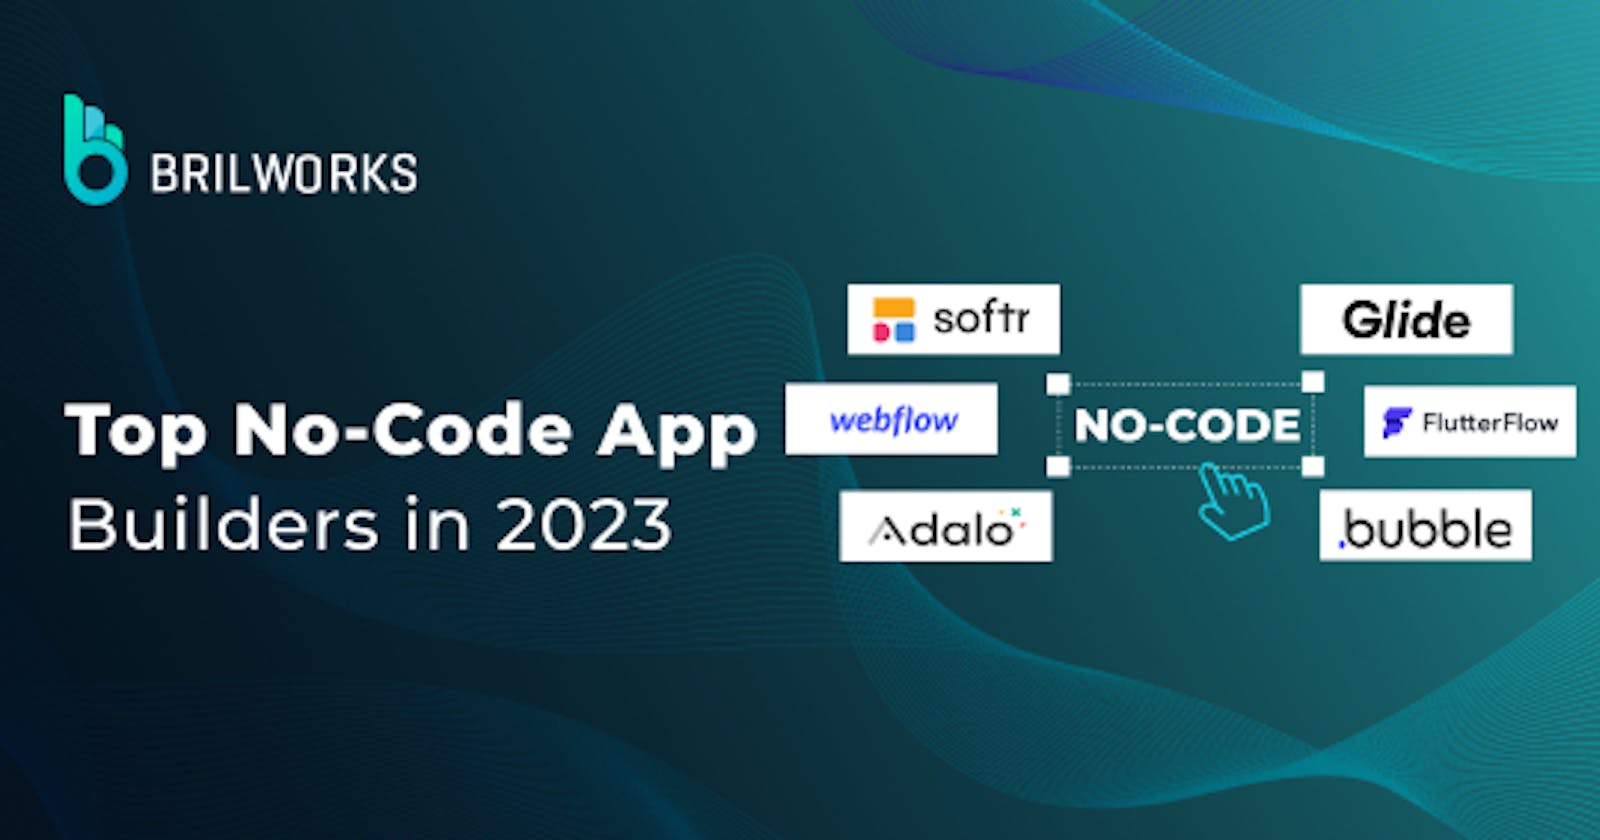 The 6 Best No-Code Tools in 2023